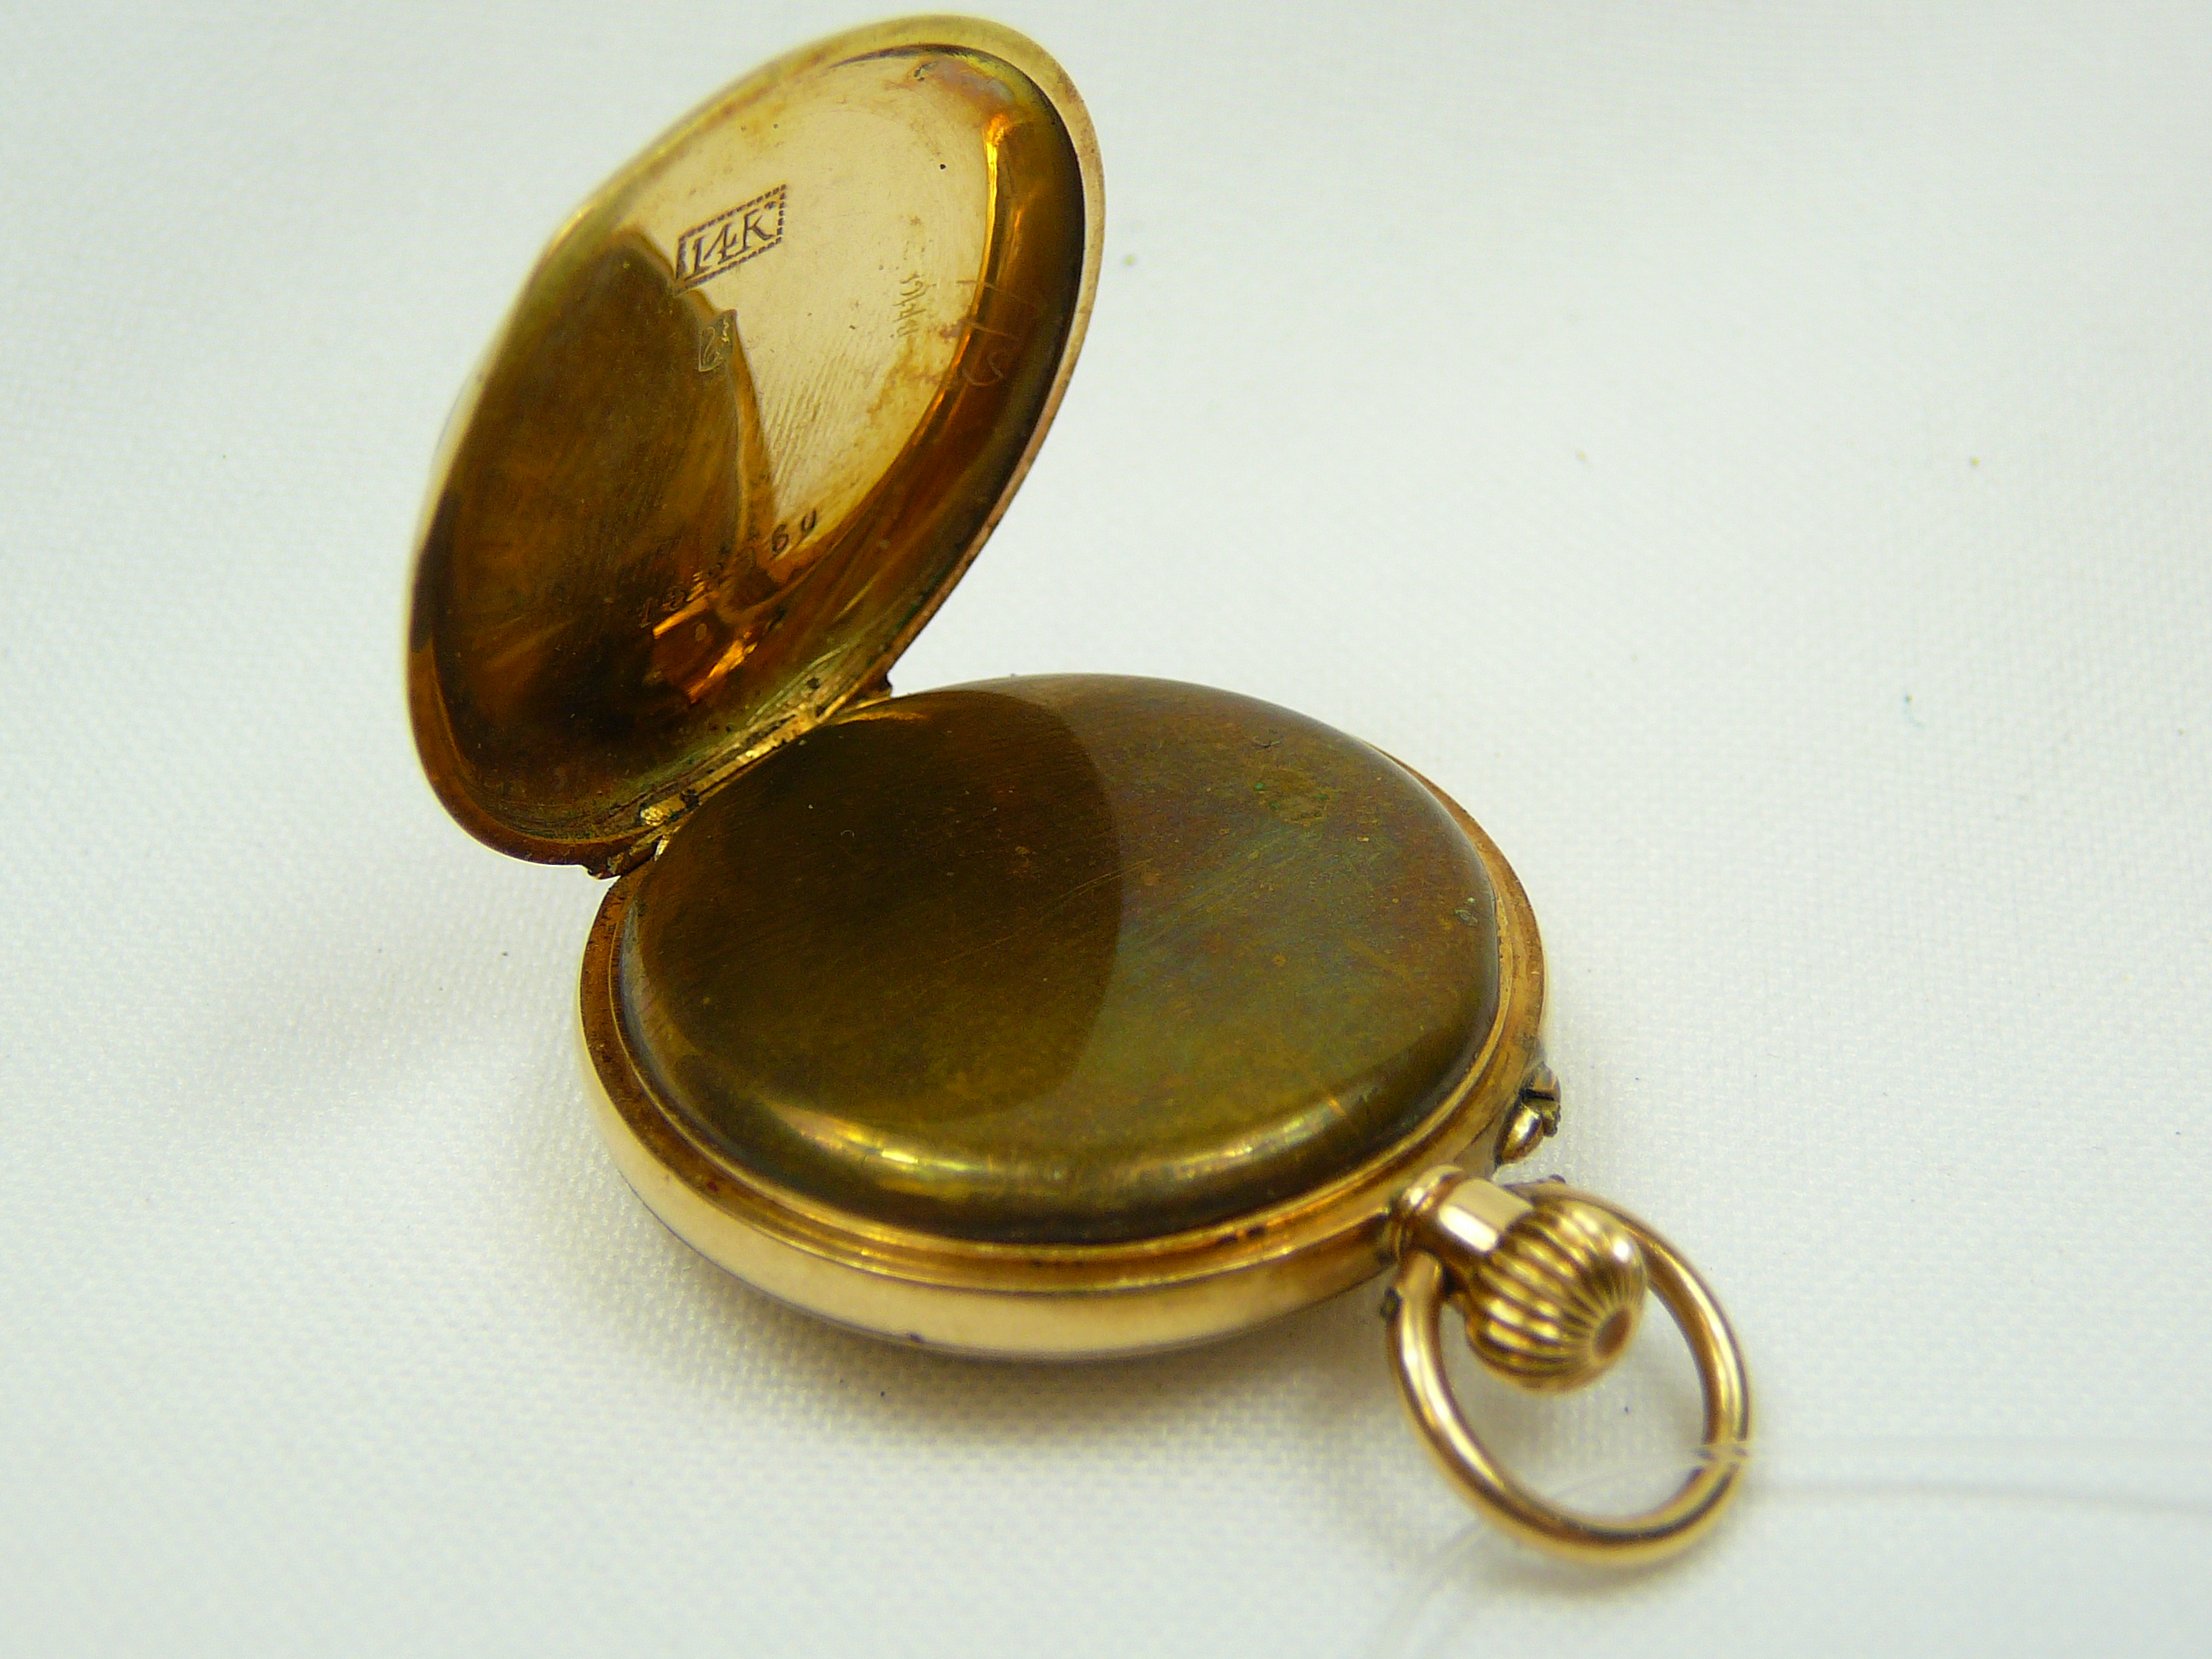 Ladies Antique Gold Fob Watch - Image 3 of 5